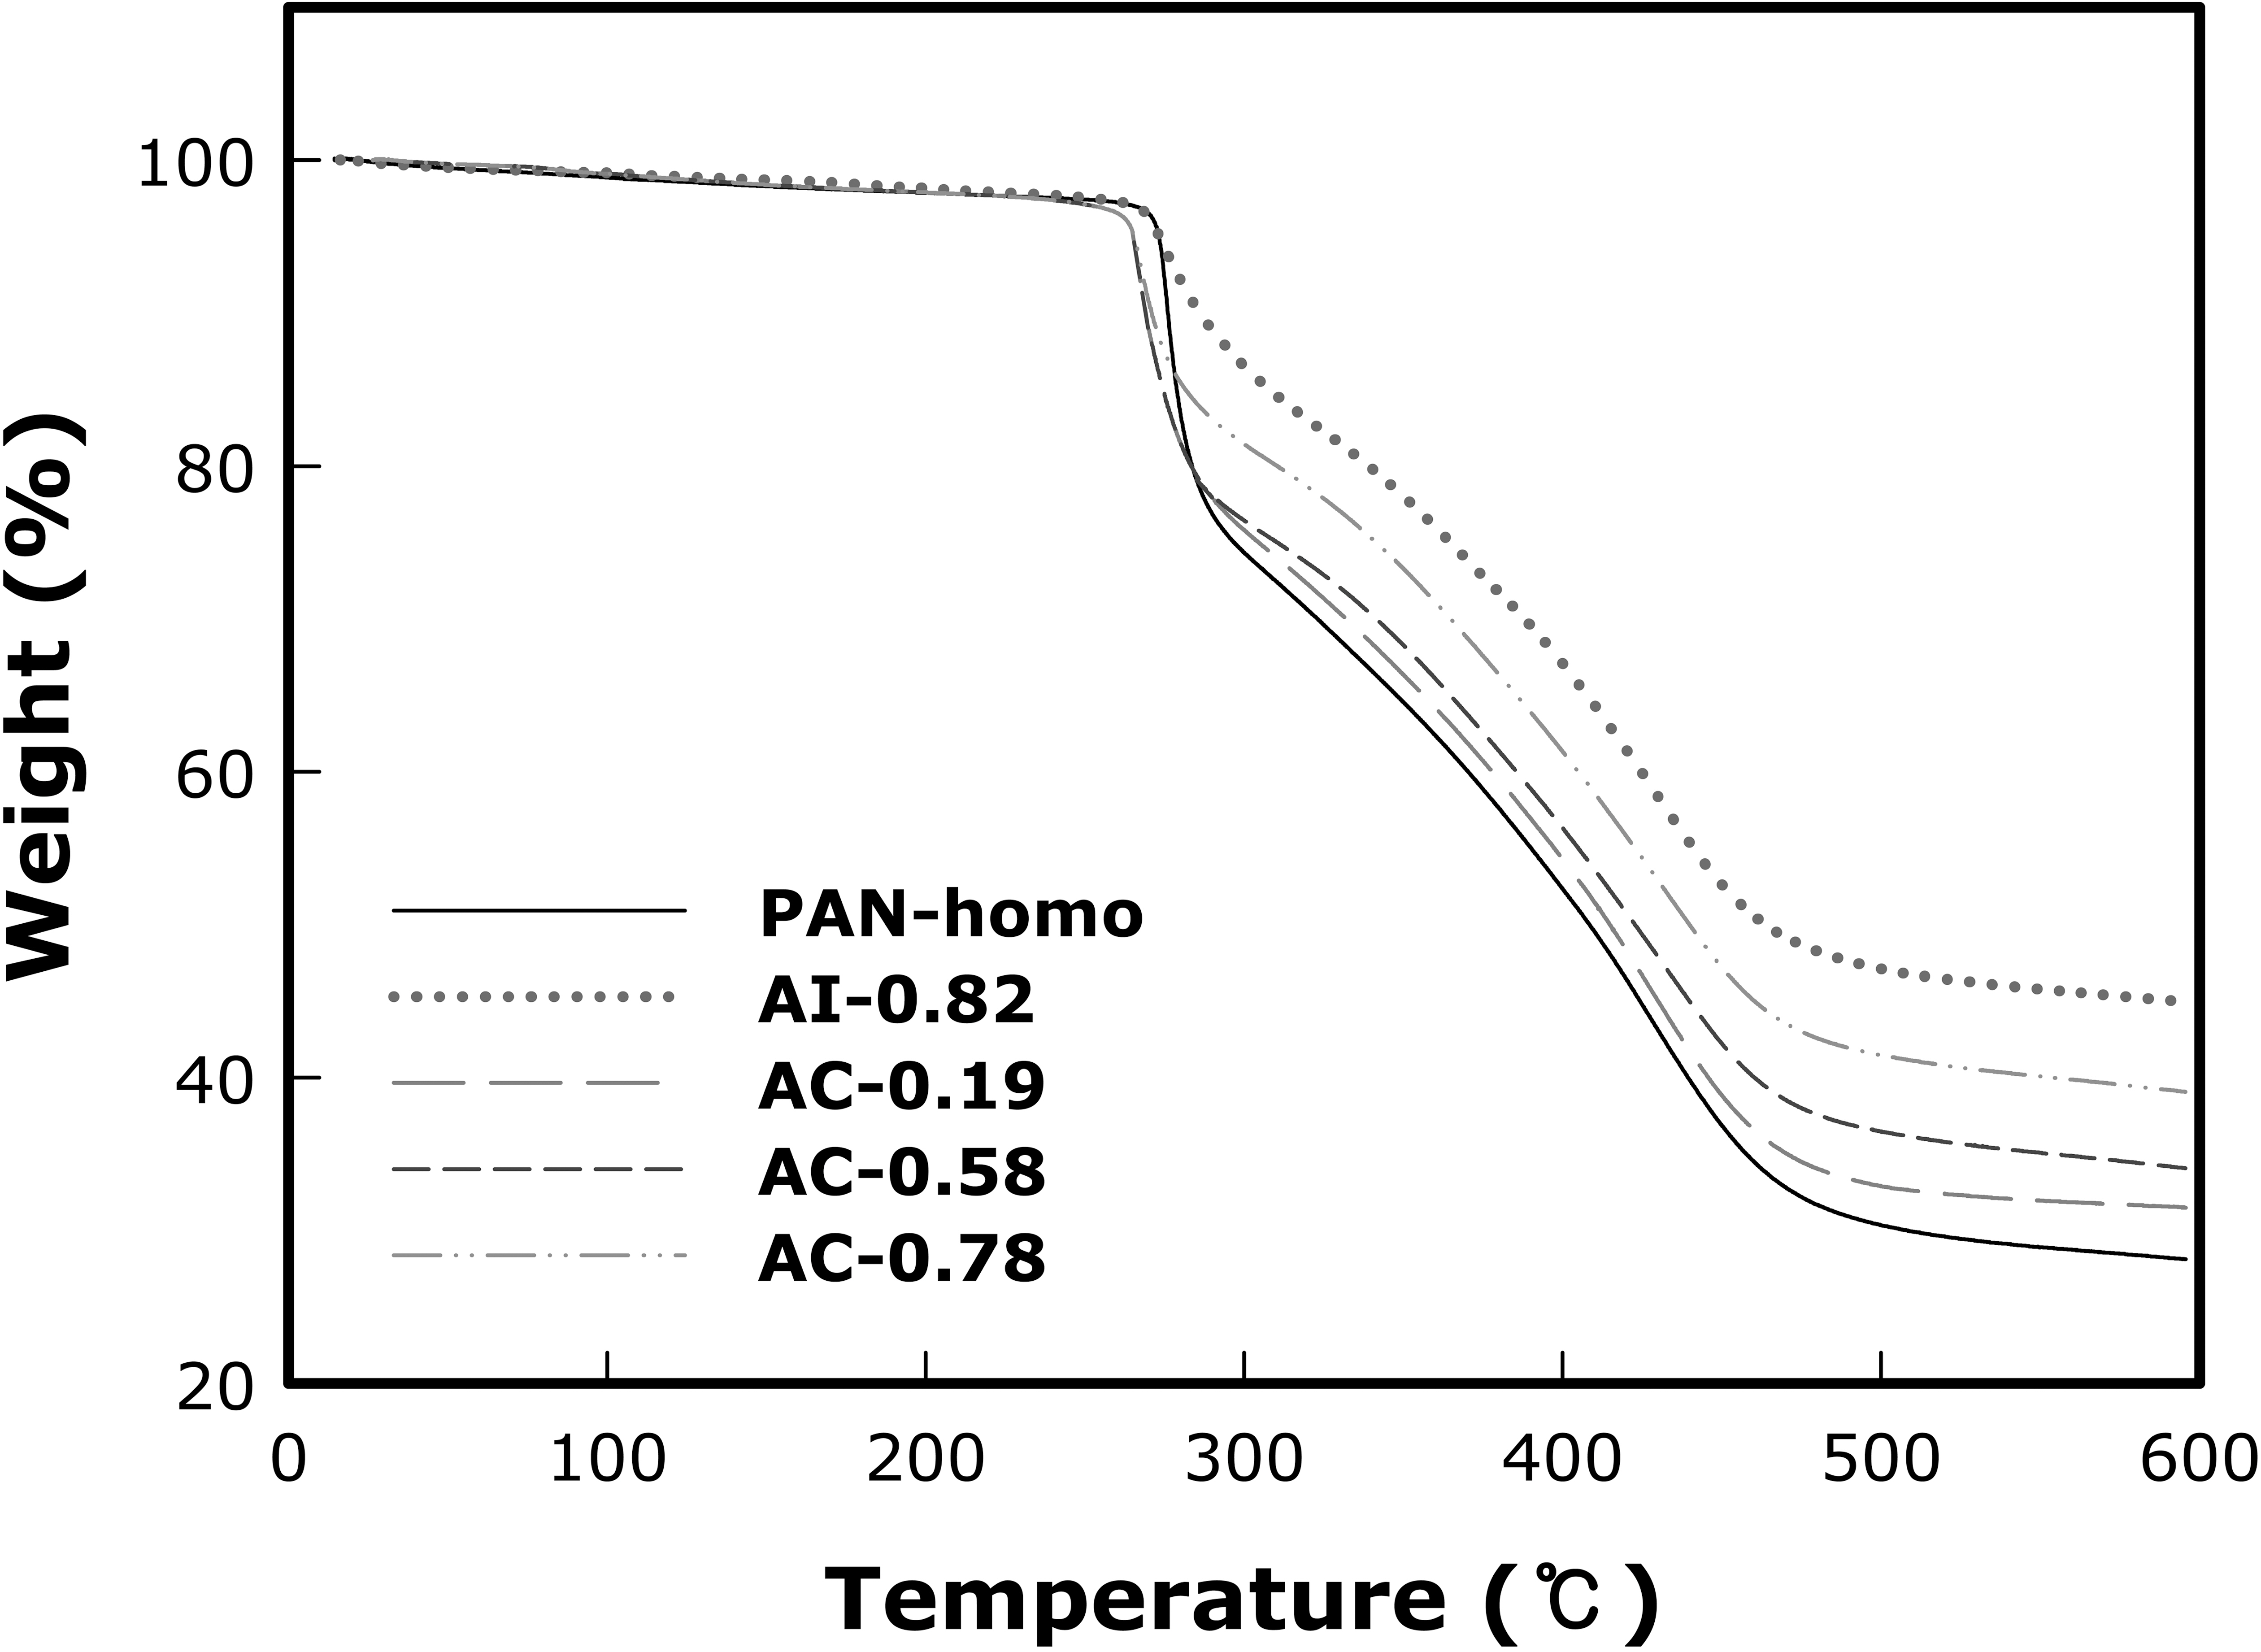 Thermogravimetric analysis curves of polyacrylonitrile(PAN) precursors in nitrogen atmosphere at a heating rate of 10oC/min.